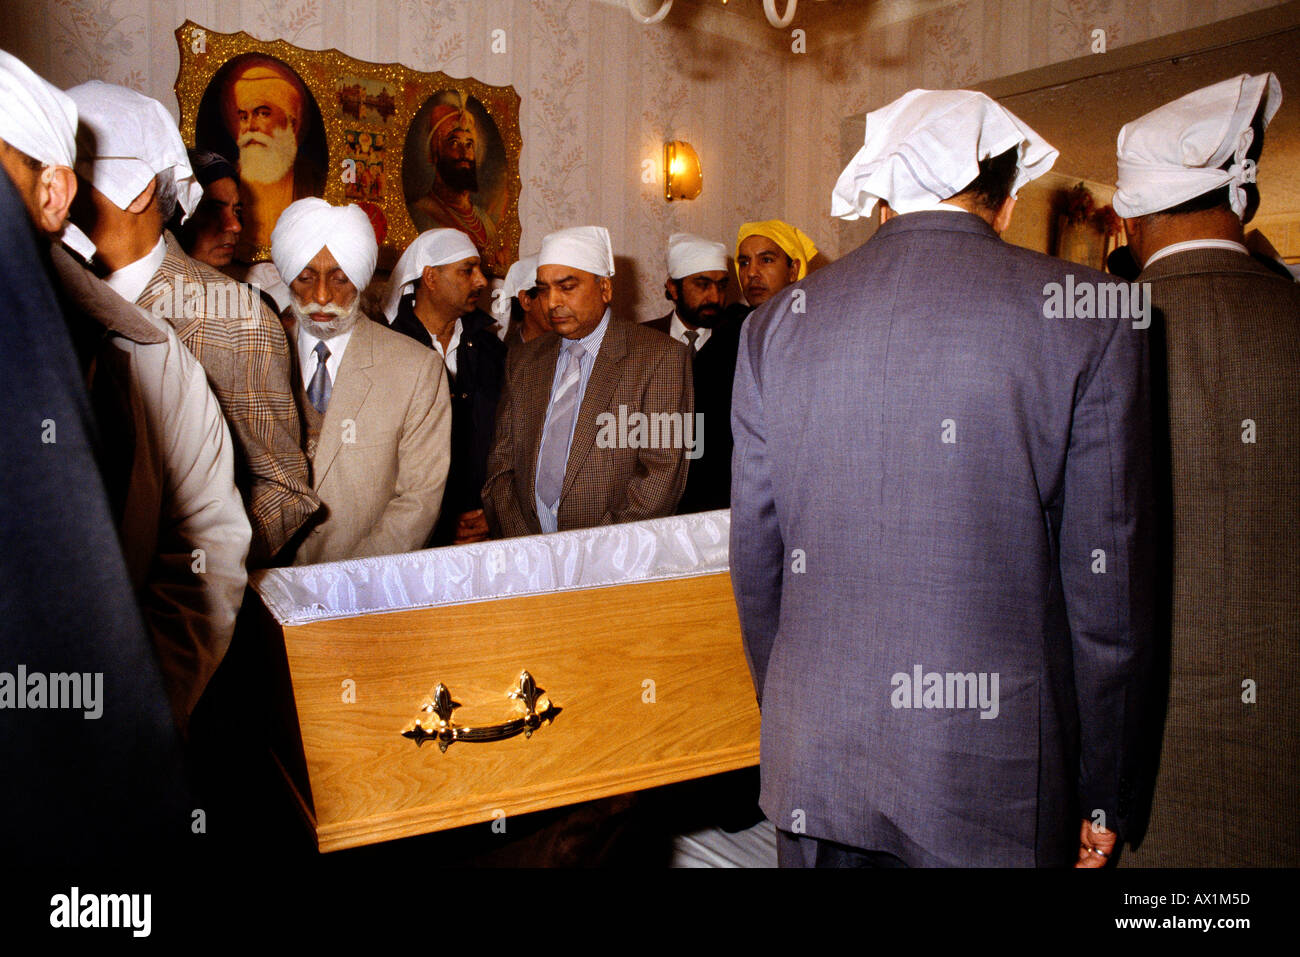 Sikh Funeral Men Filing Past Coffin At Home Stock Photo